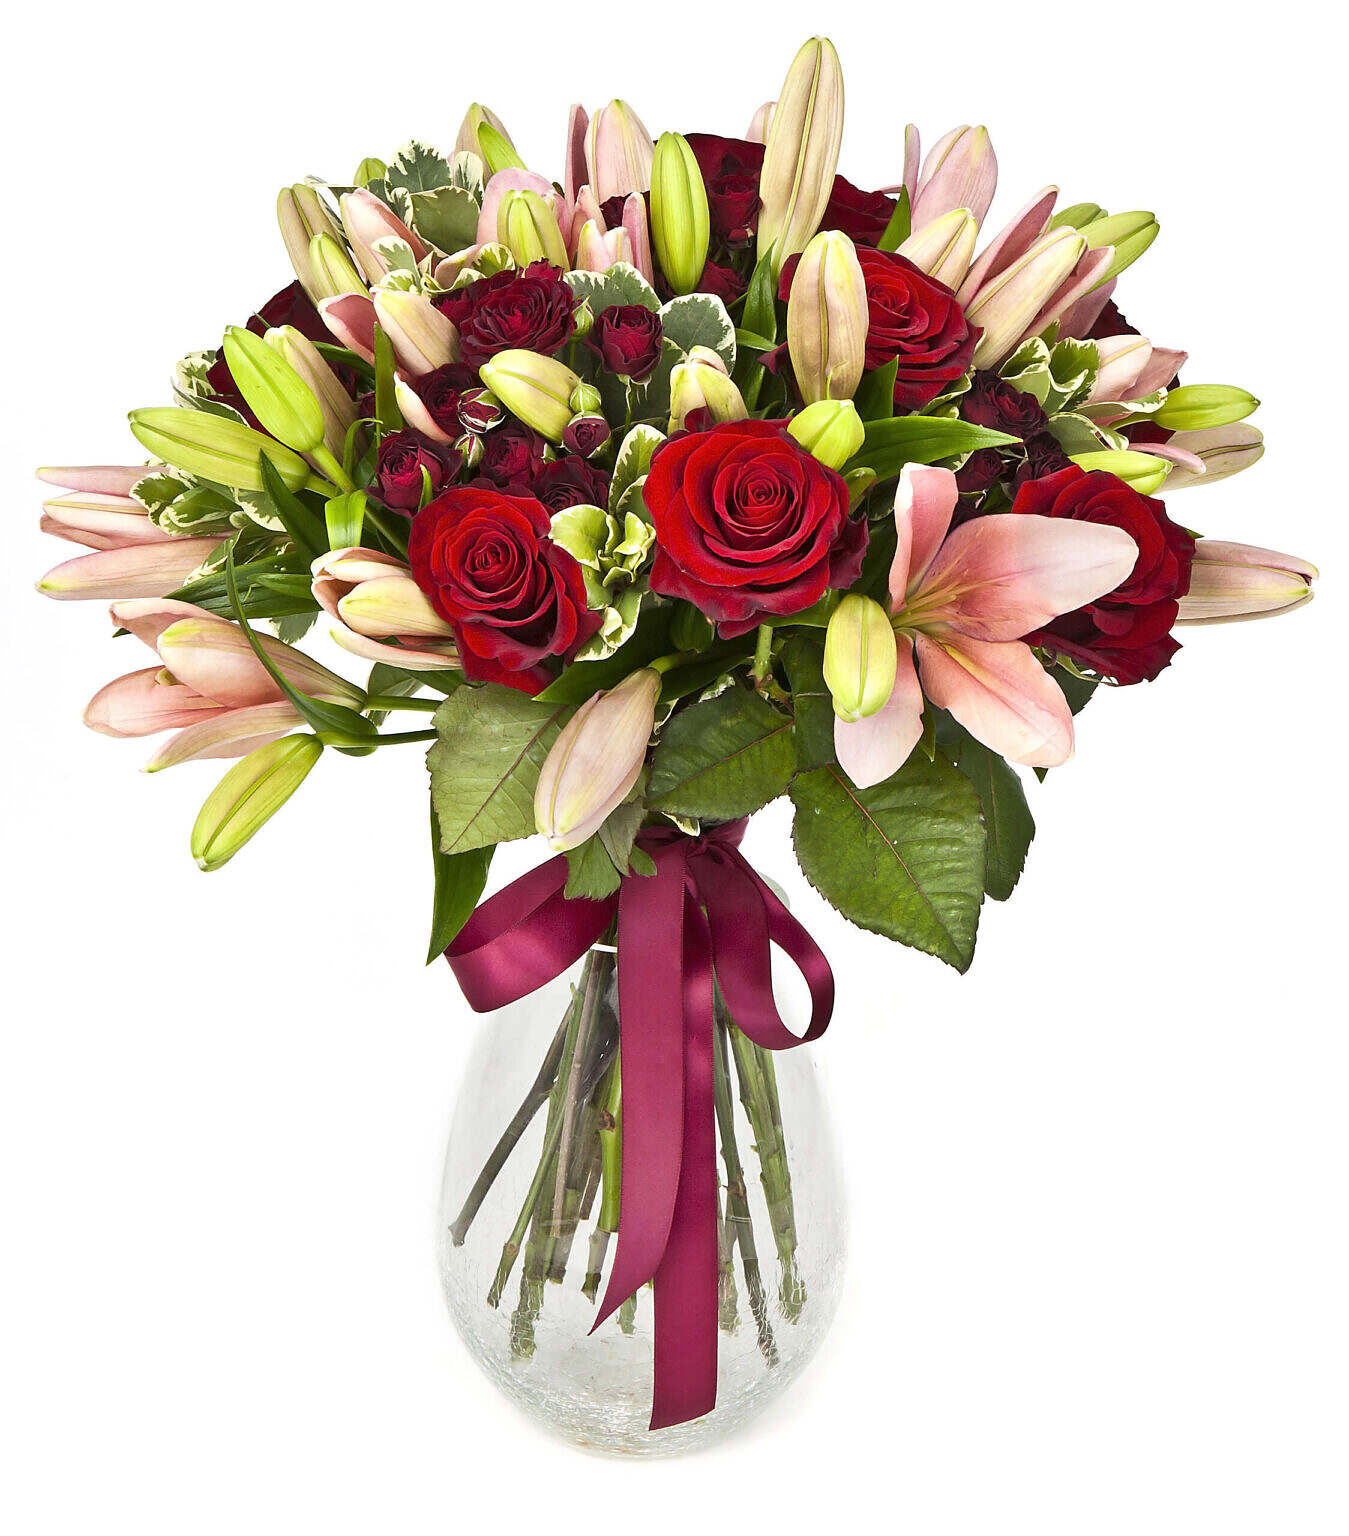 CUSTOM FLOWER ARRANGEMENTS NYC – Flowers Delivery NYC